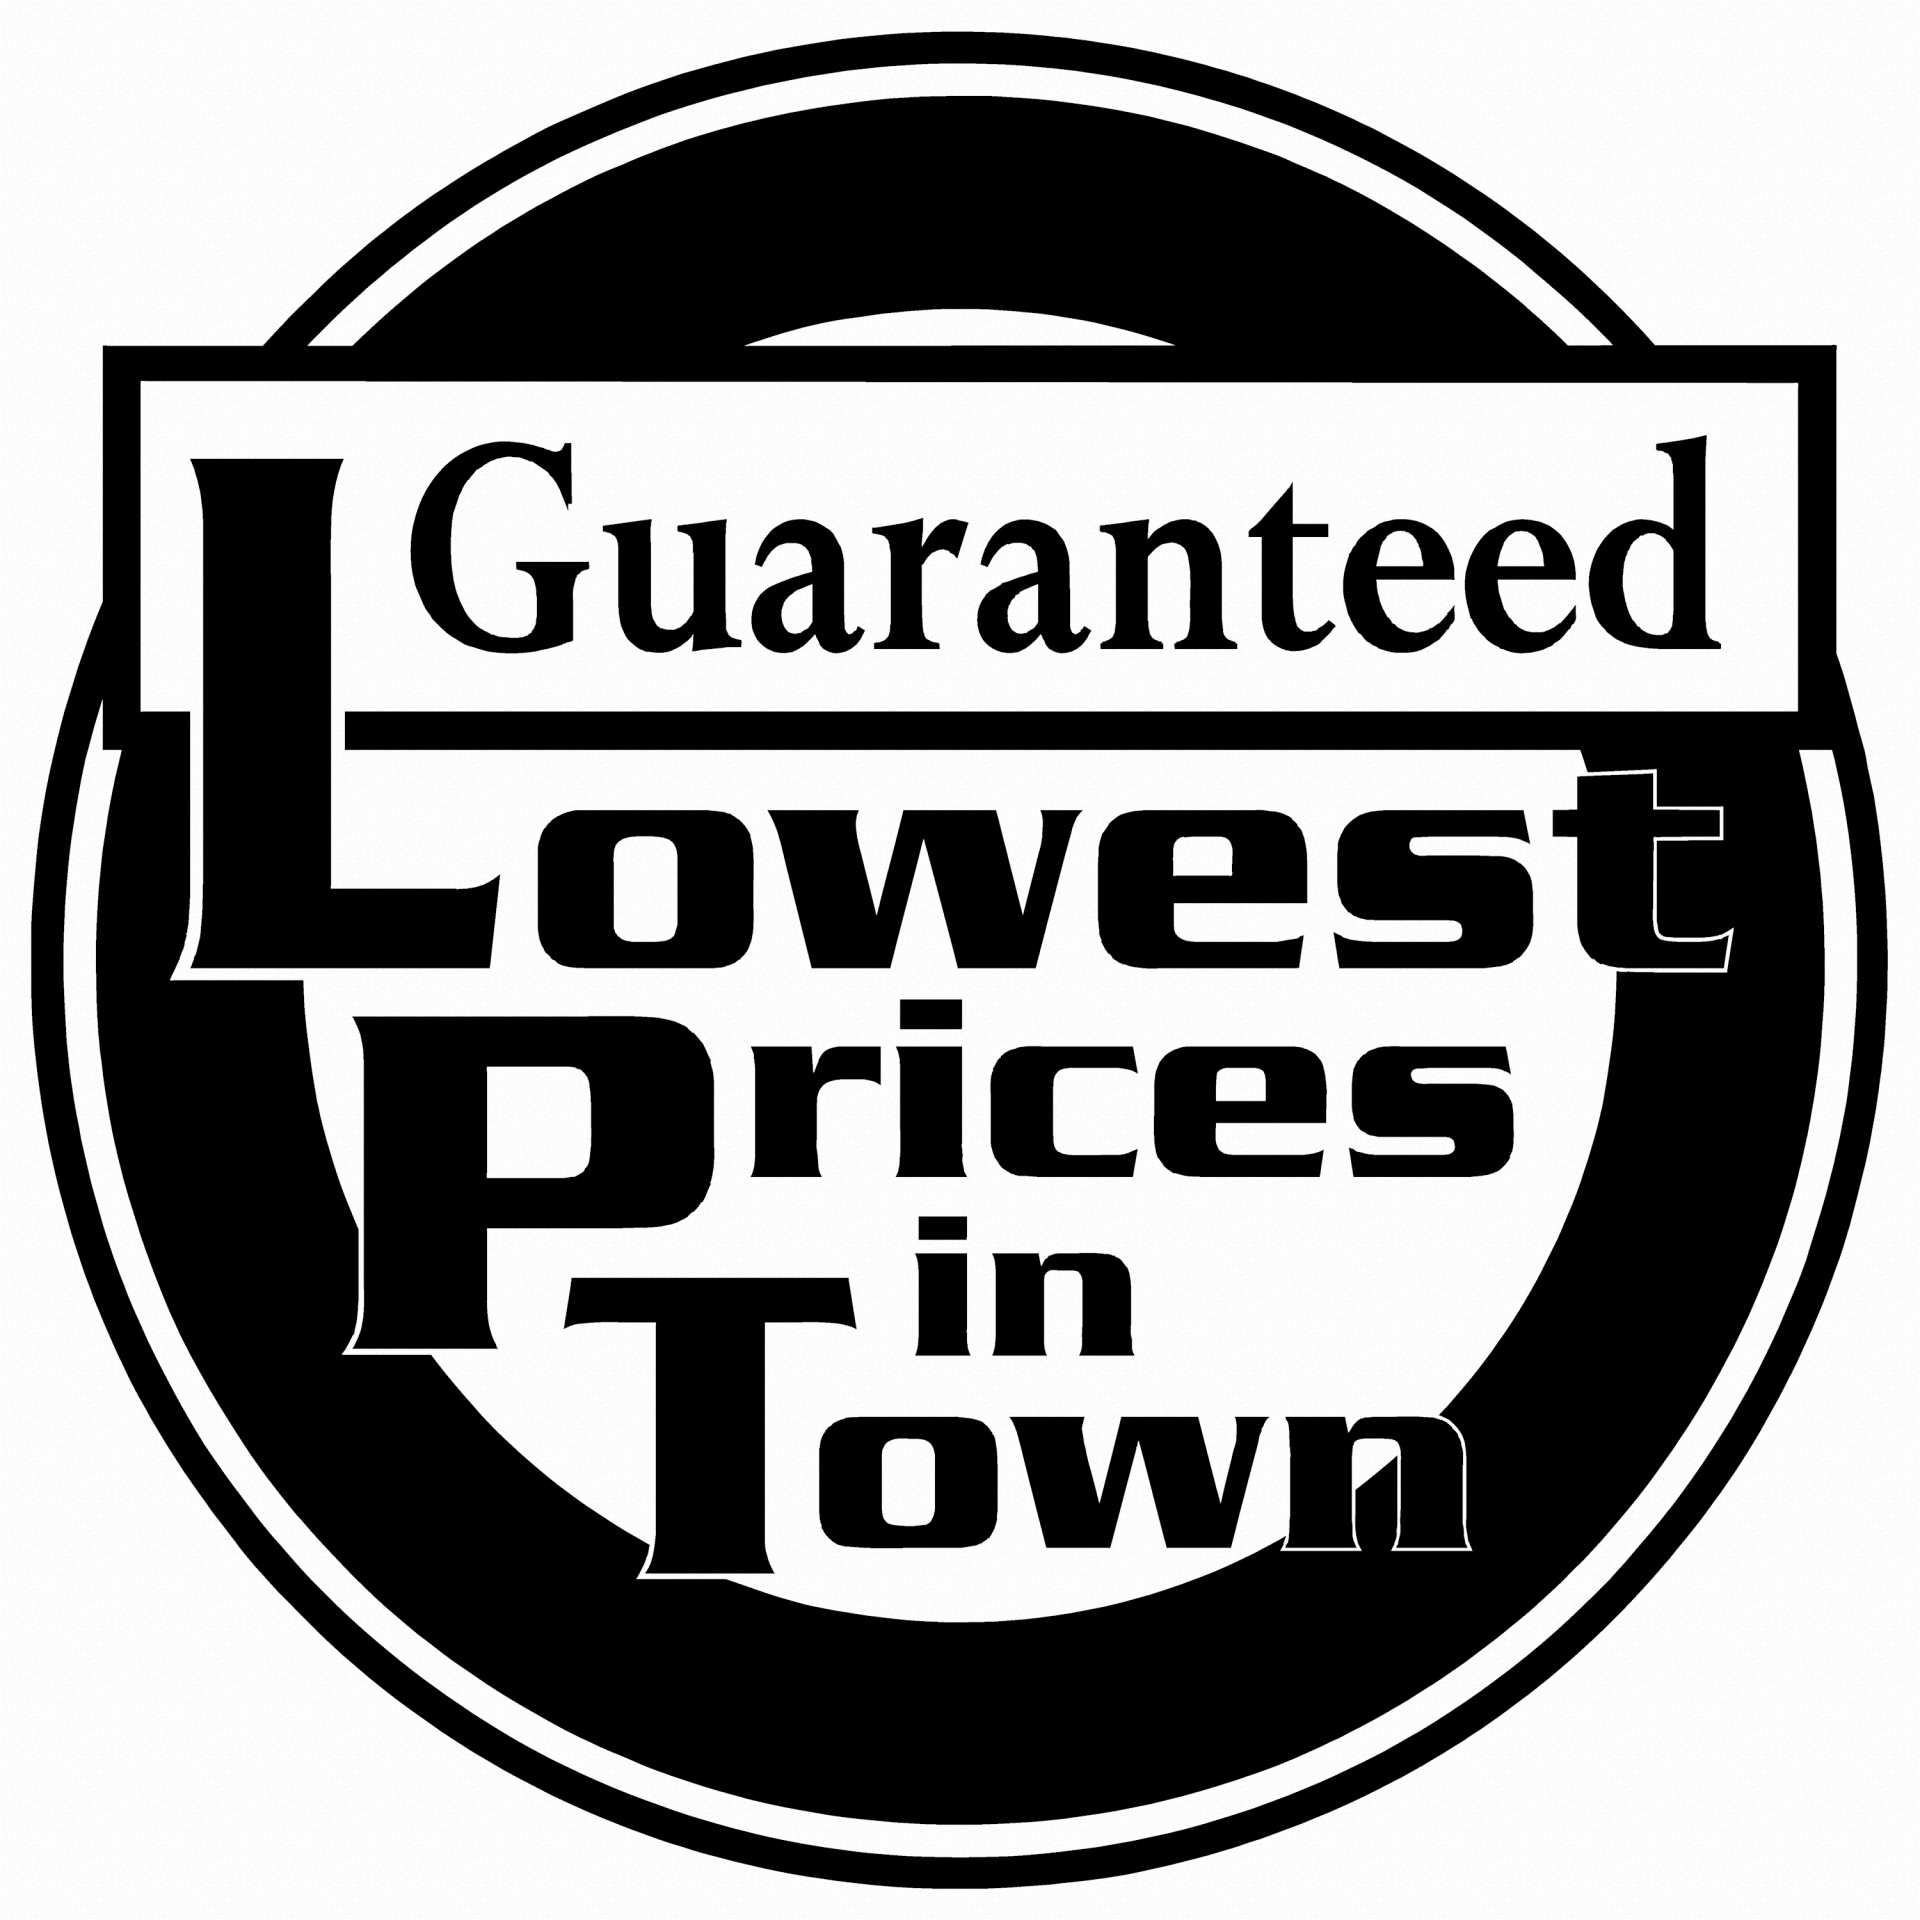 lowes-prices-in-town.jpg